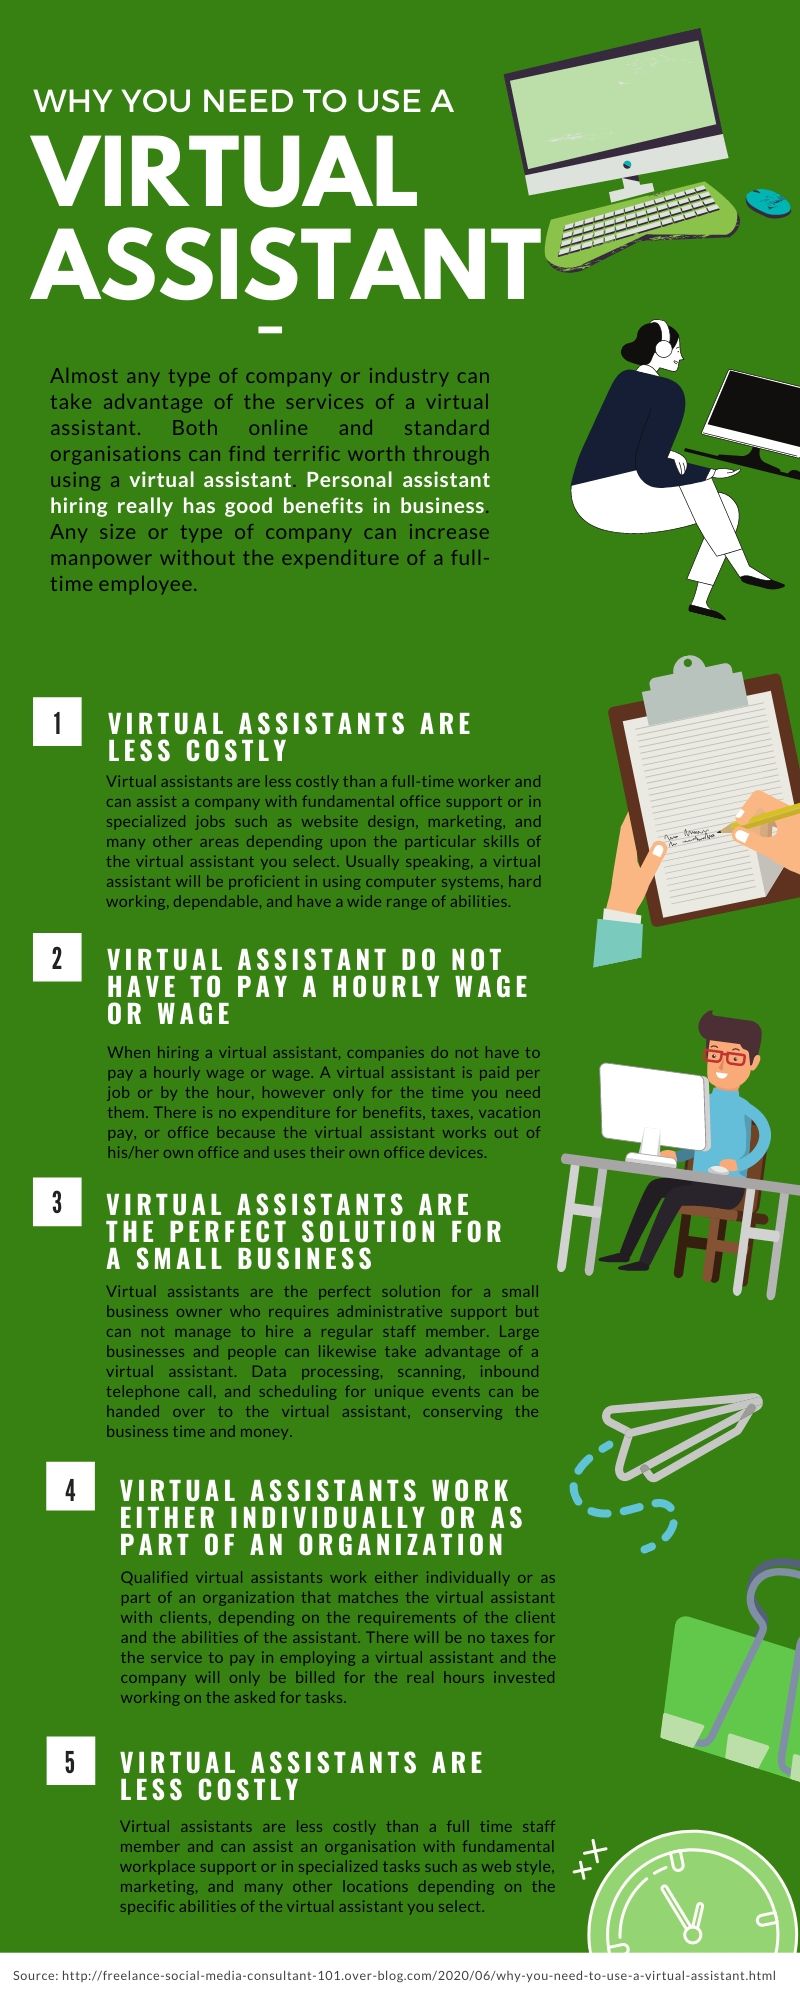 Why You Need To Use A Virtual Assistant